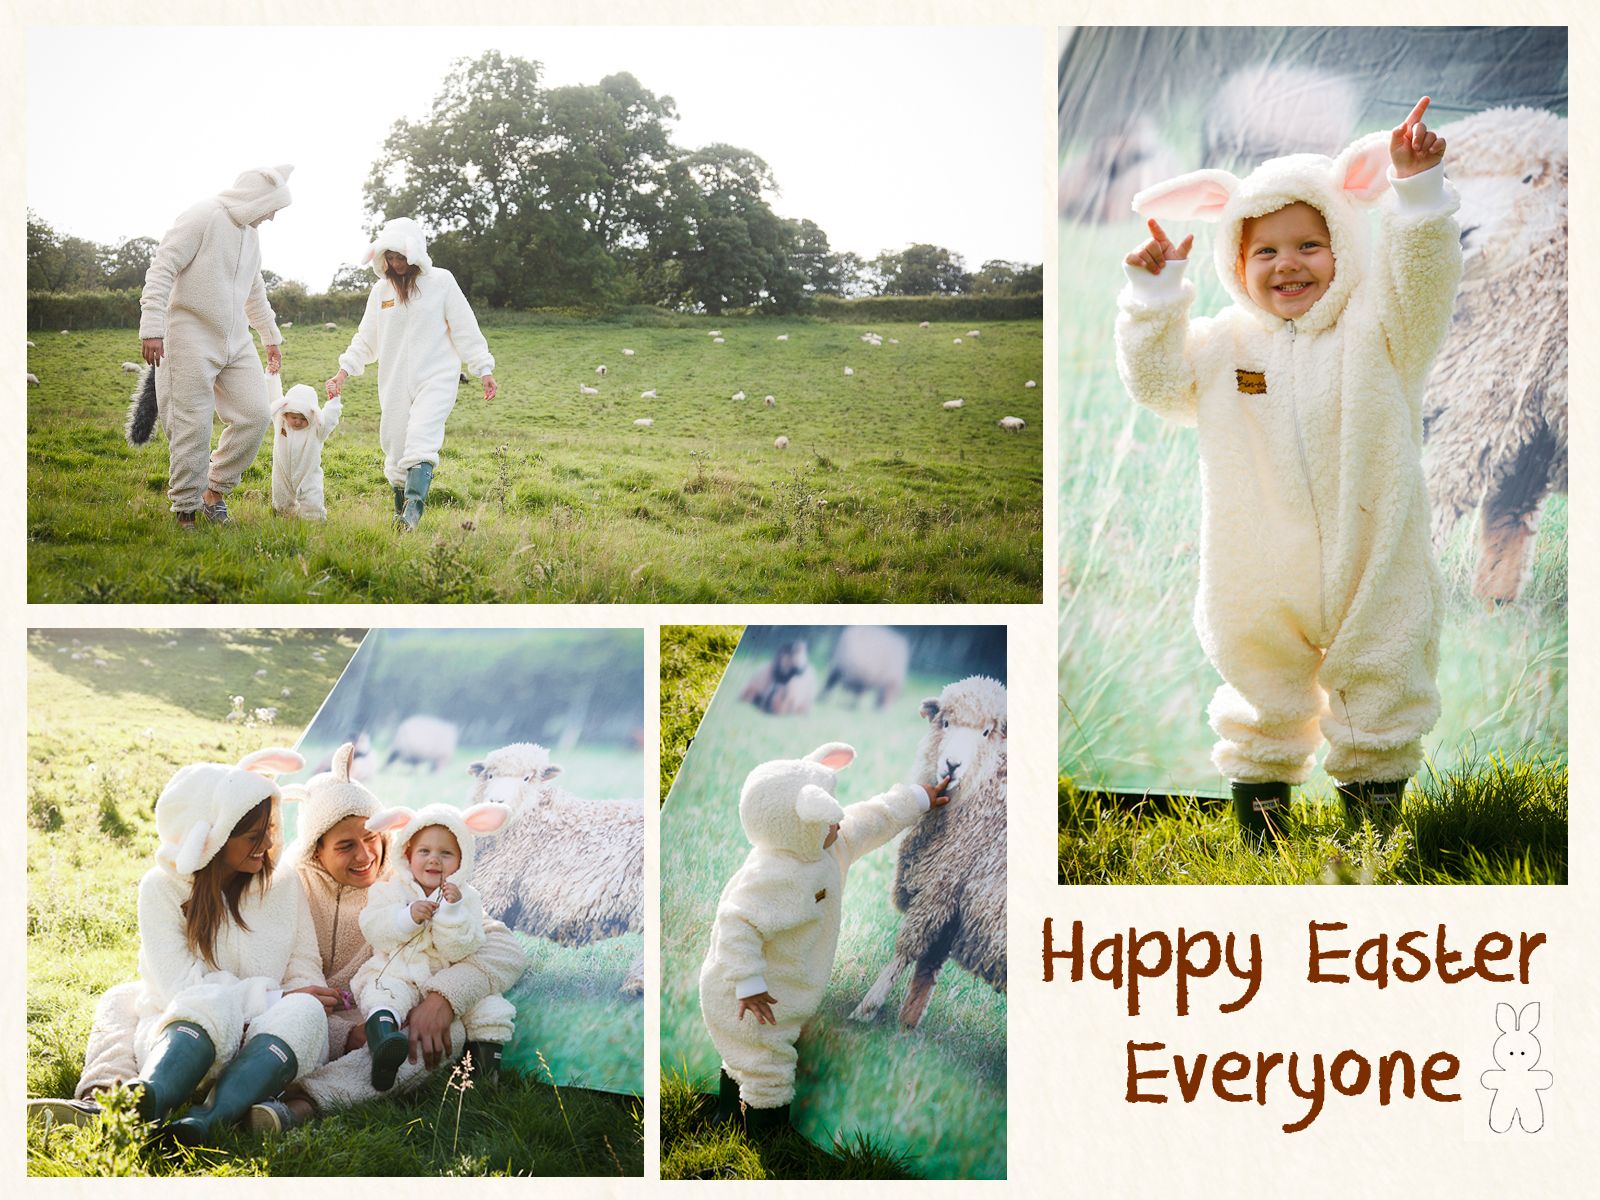 The All-in-One Company wish you a Happy Onesie Easter